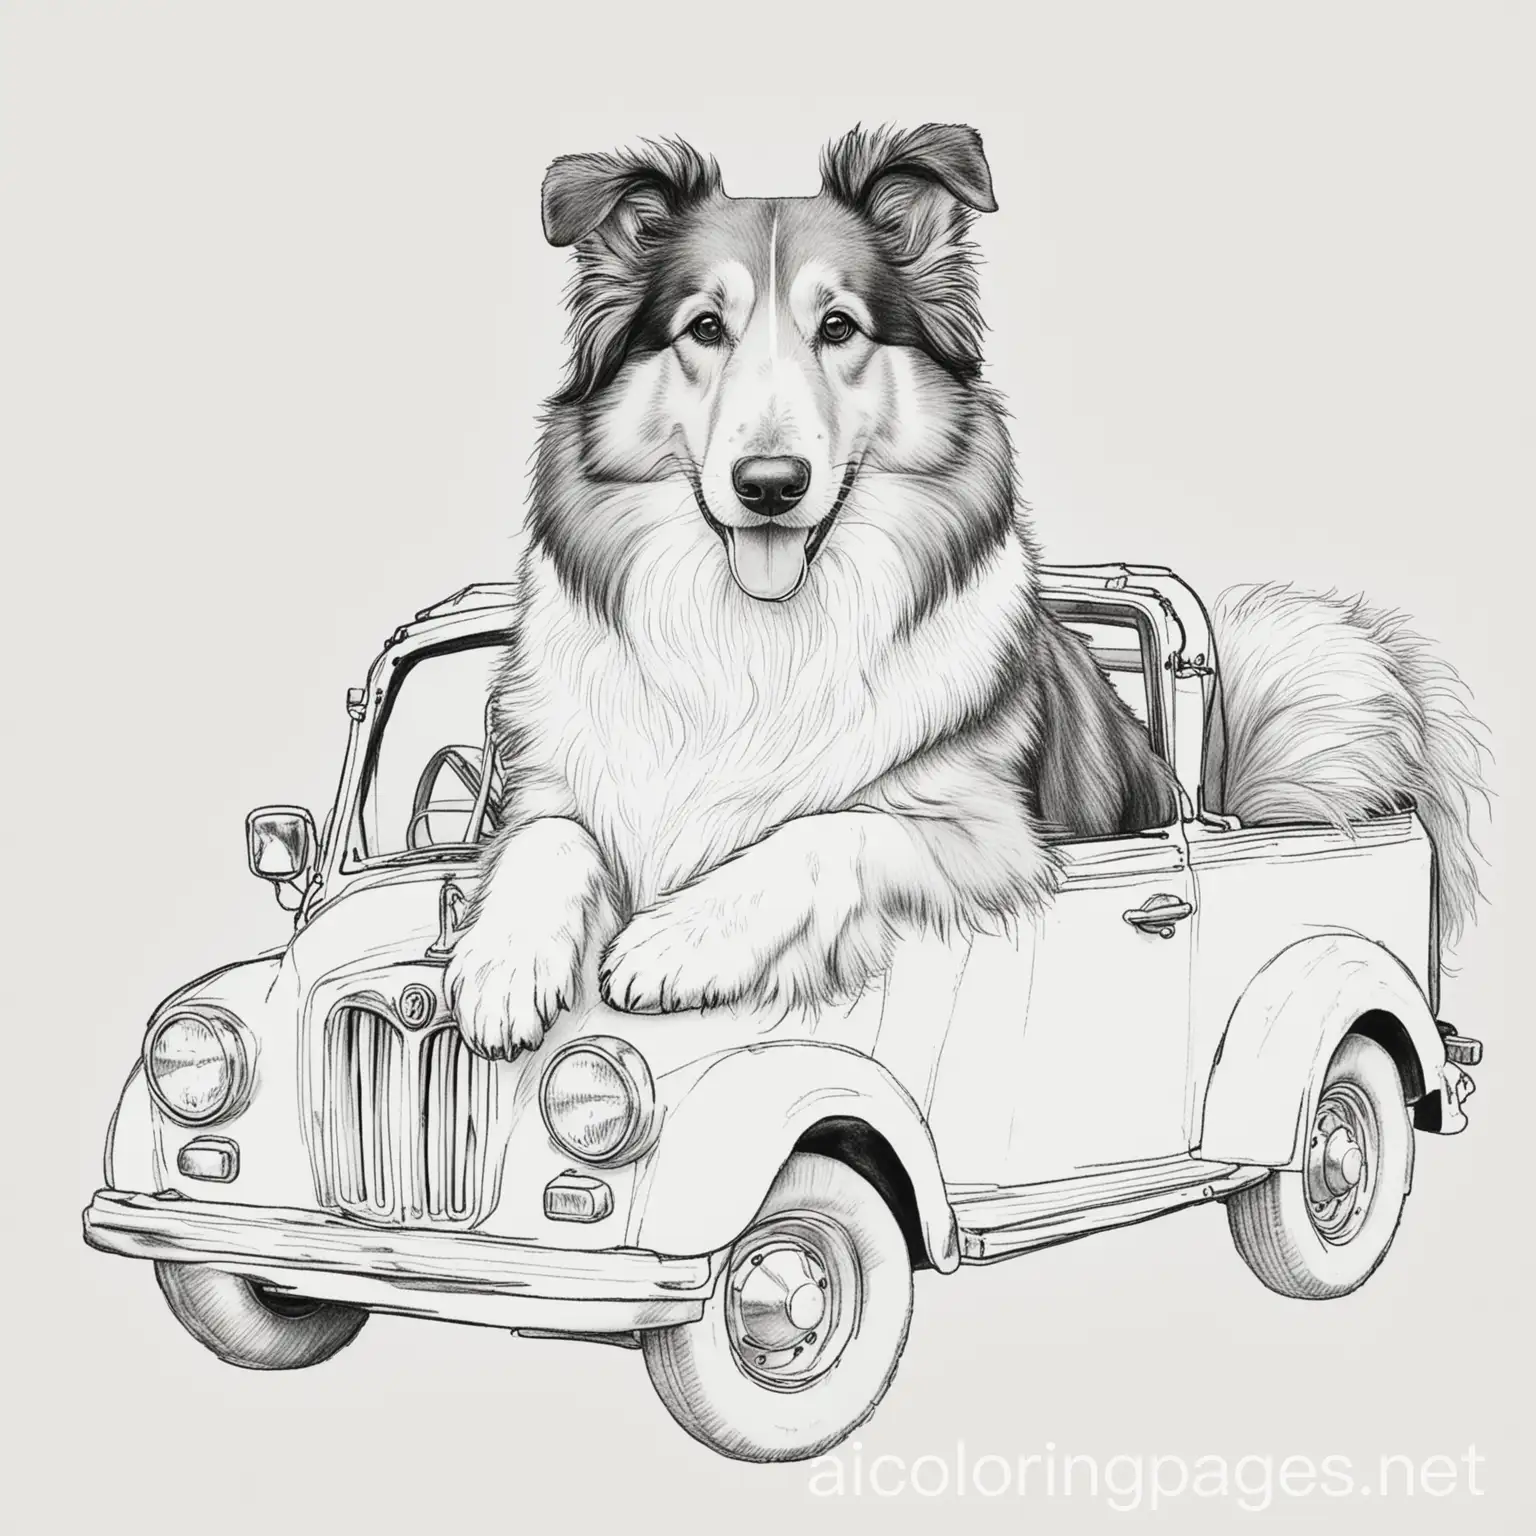 Rough-Collie-Riding-in-Car-Coloring-Page-for-Relaxation